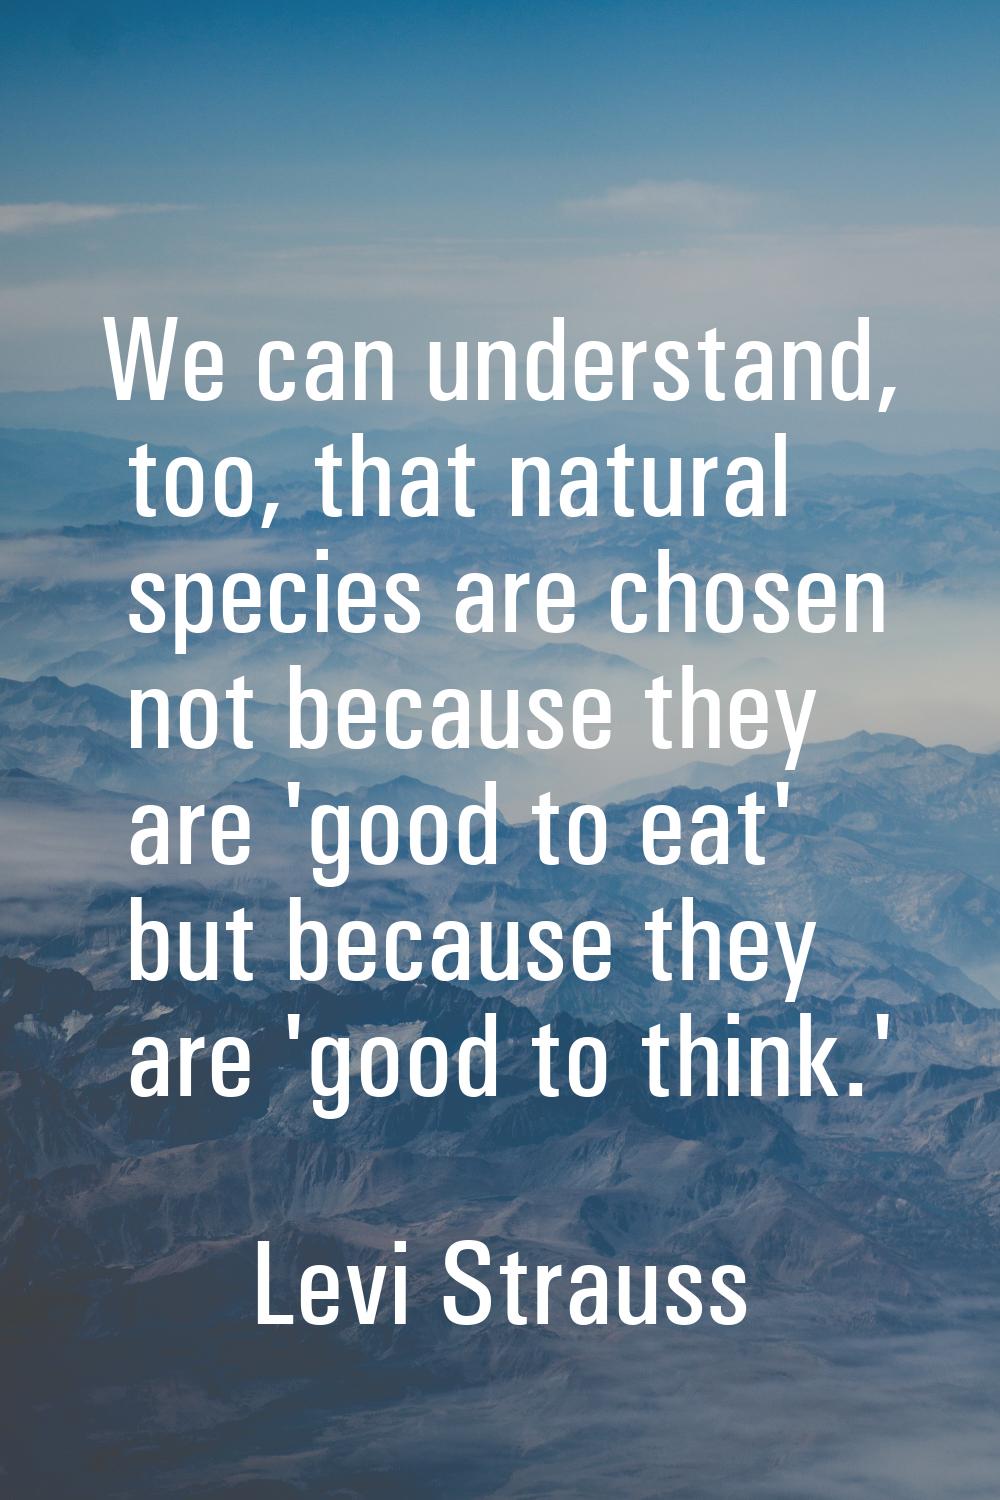 We can understand, too, that natural species are chosen not because they are 'good to eat' but beca